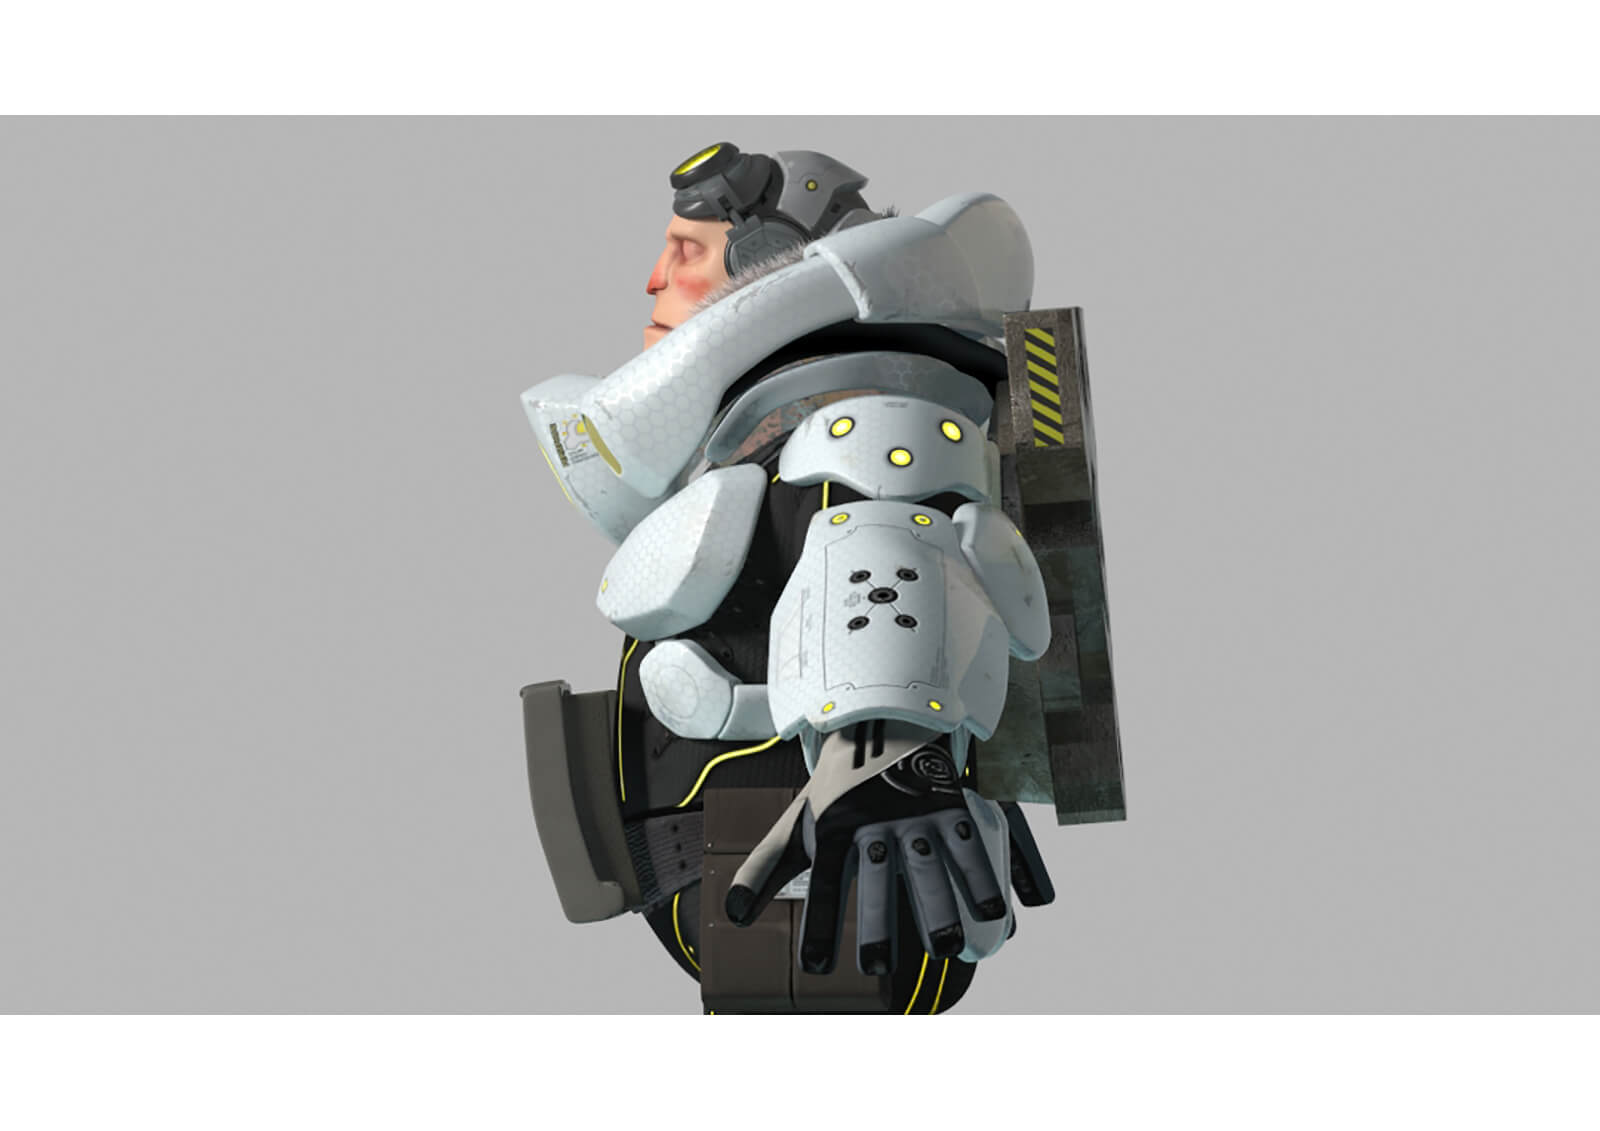 3D model from the film Level 1457 of a man in goggles and black and white futuristic armor as seen from the side